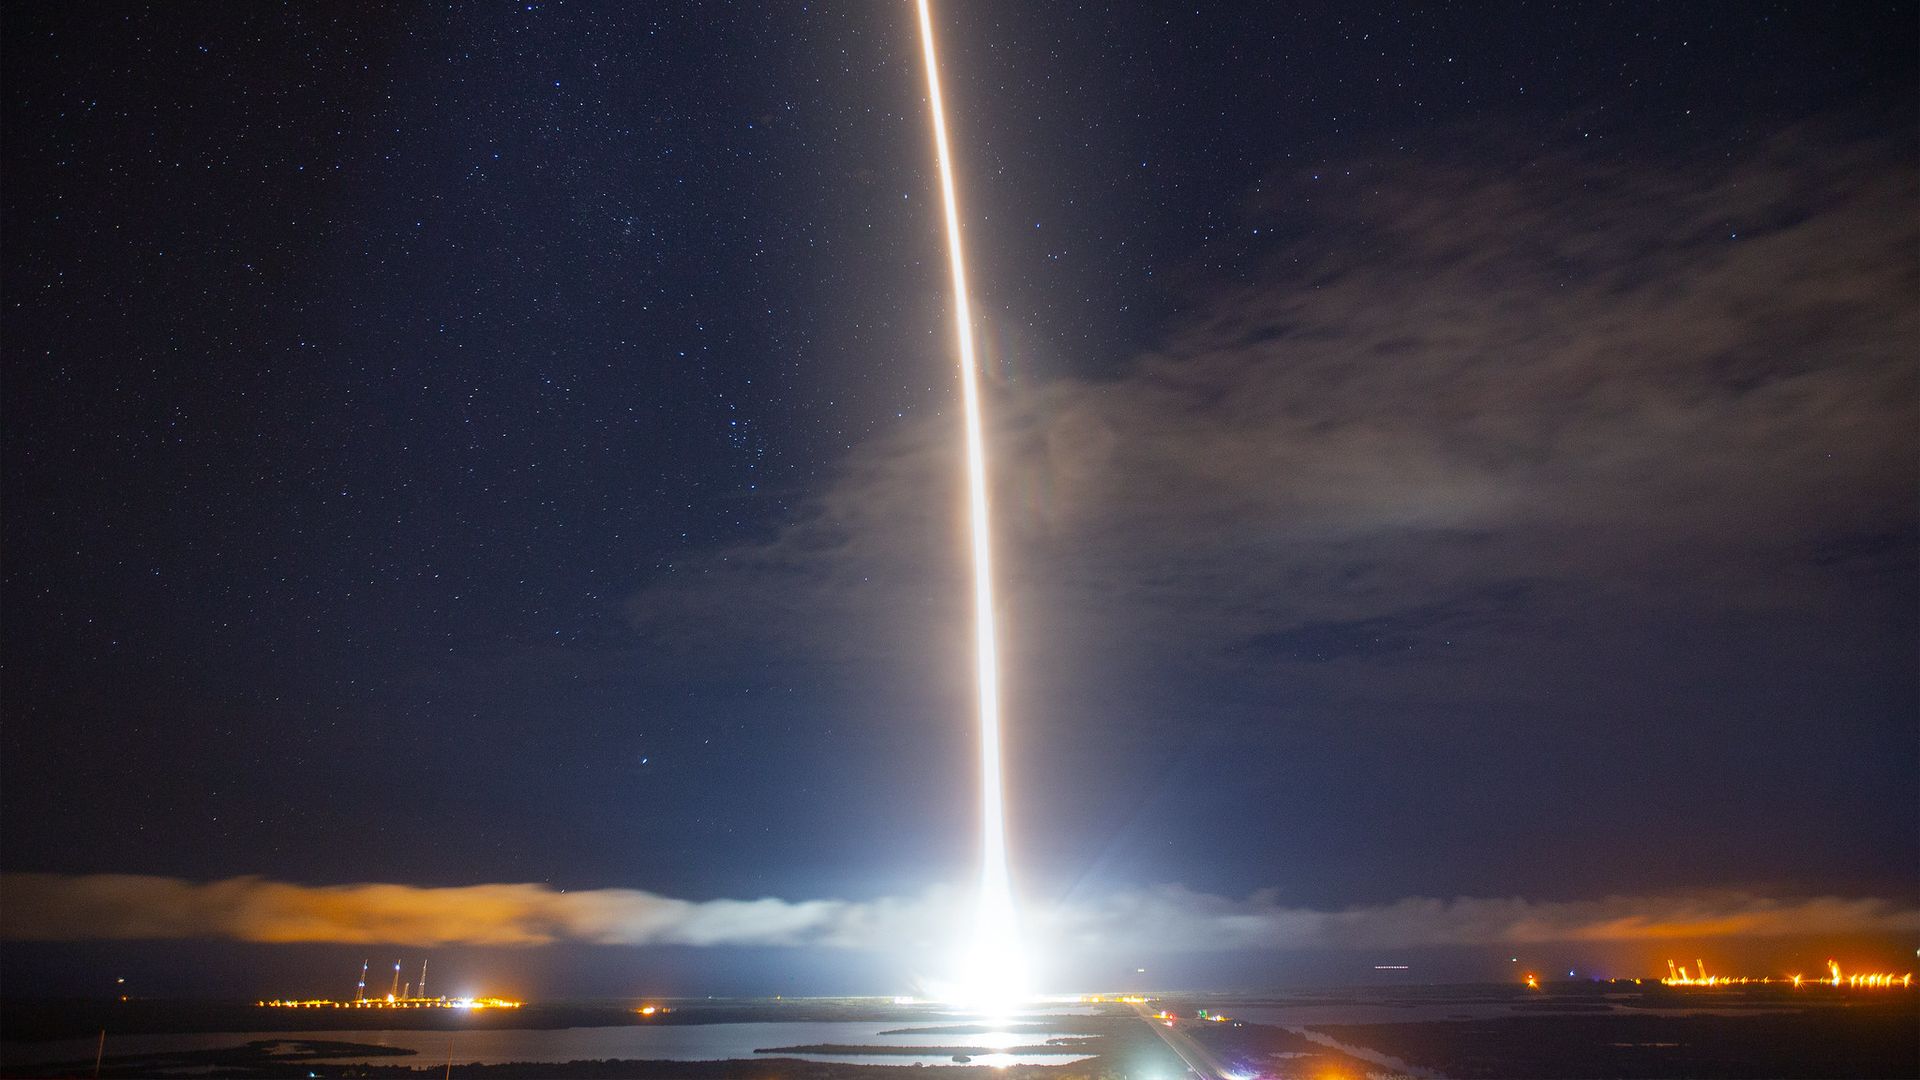 The streak of a rocket with stars in the background at night